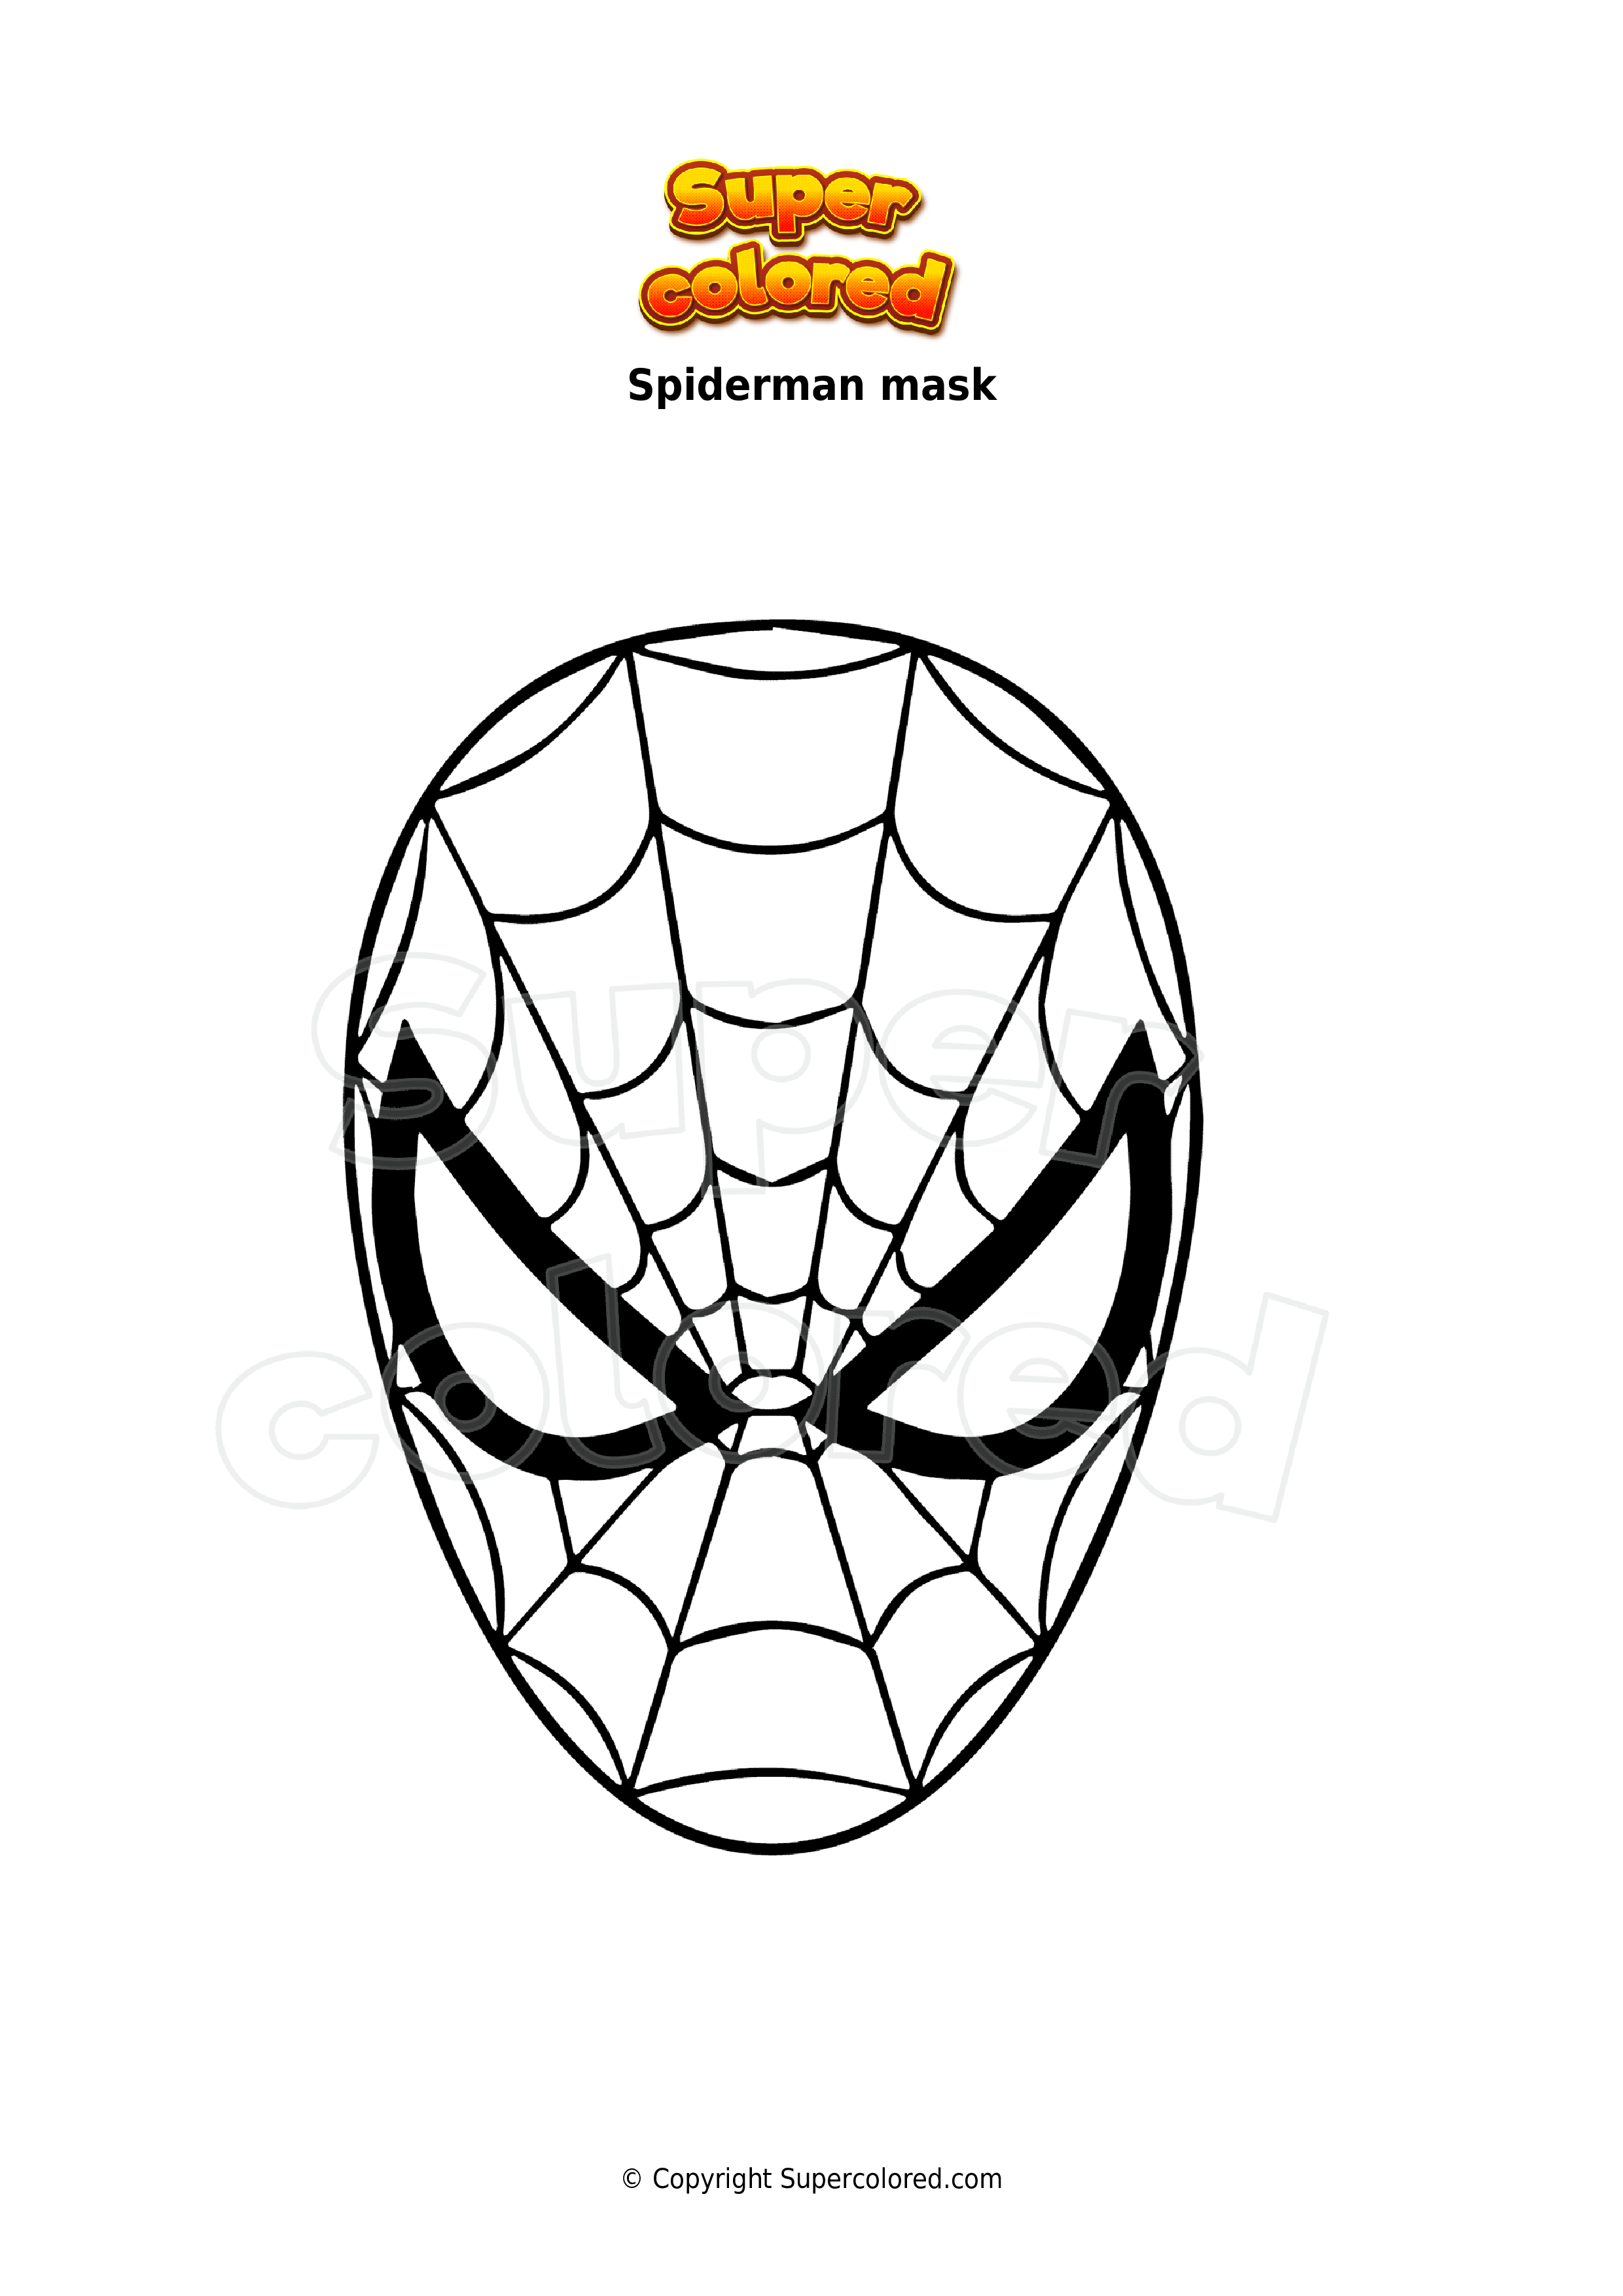 Coloring page Spiderman mask ...